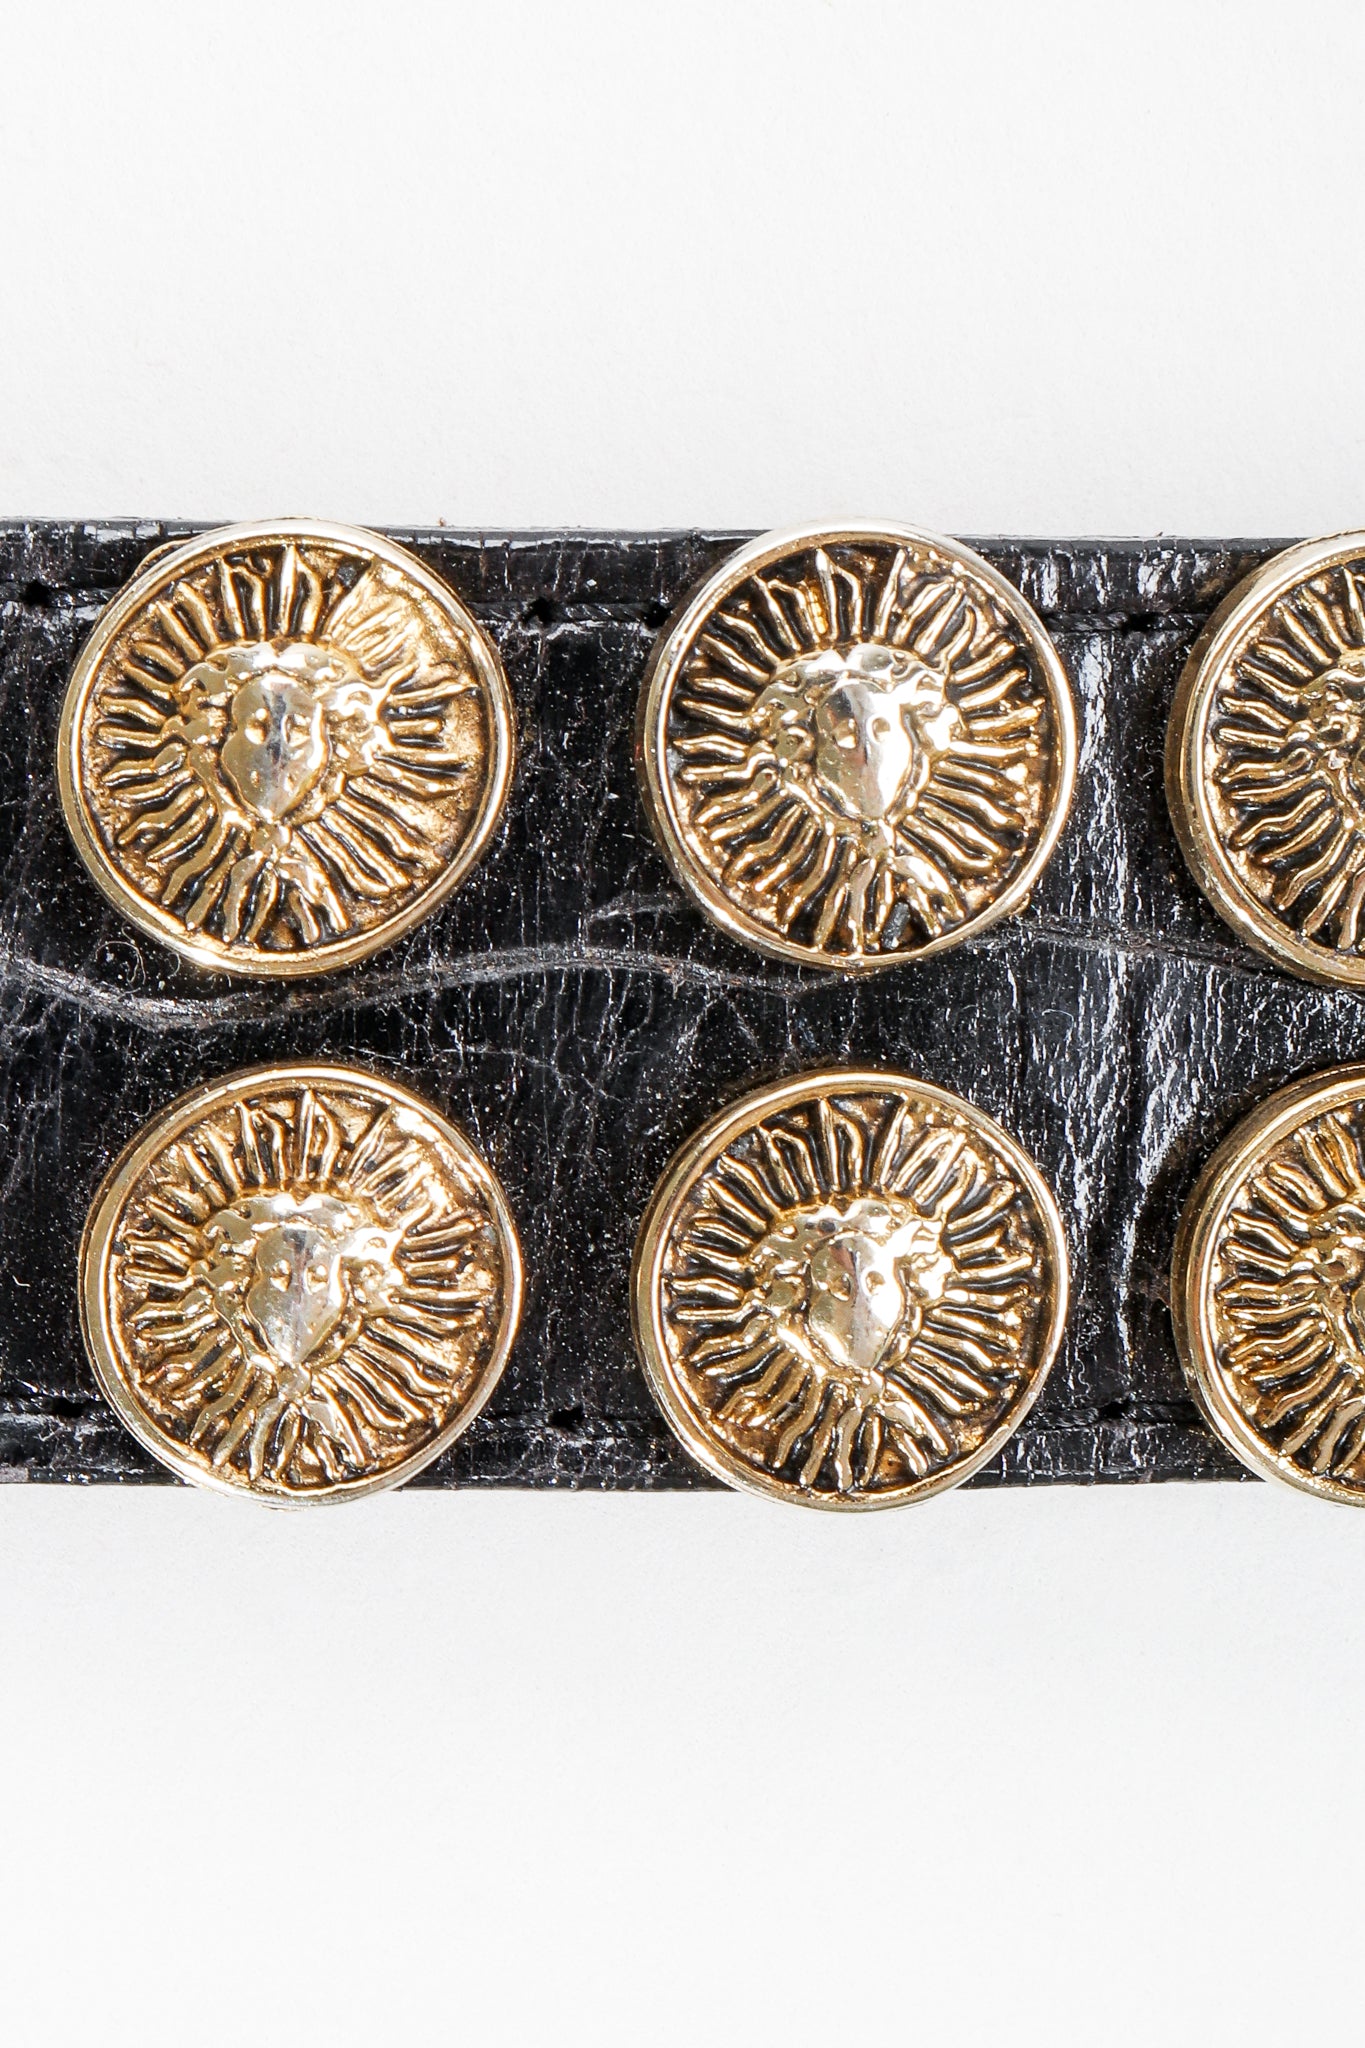 Vintage Streets Ahead Medusa Leather Pin Belt detail at Recess Los Angeles